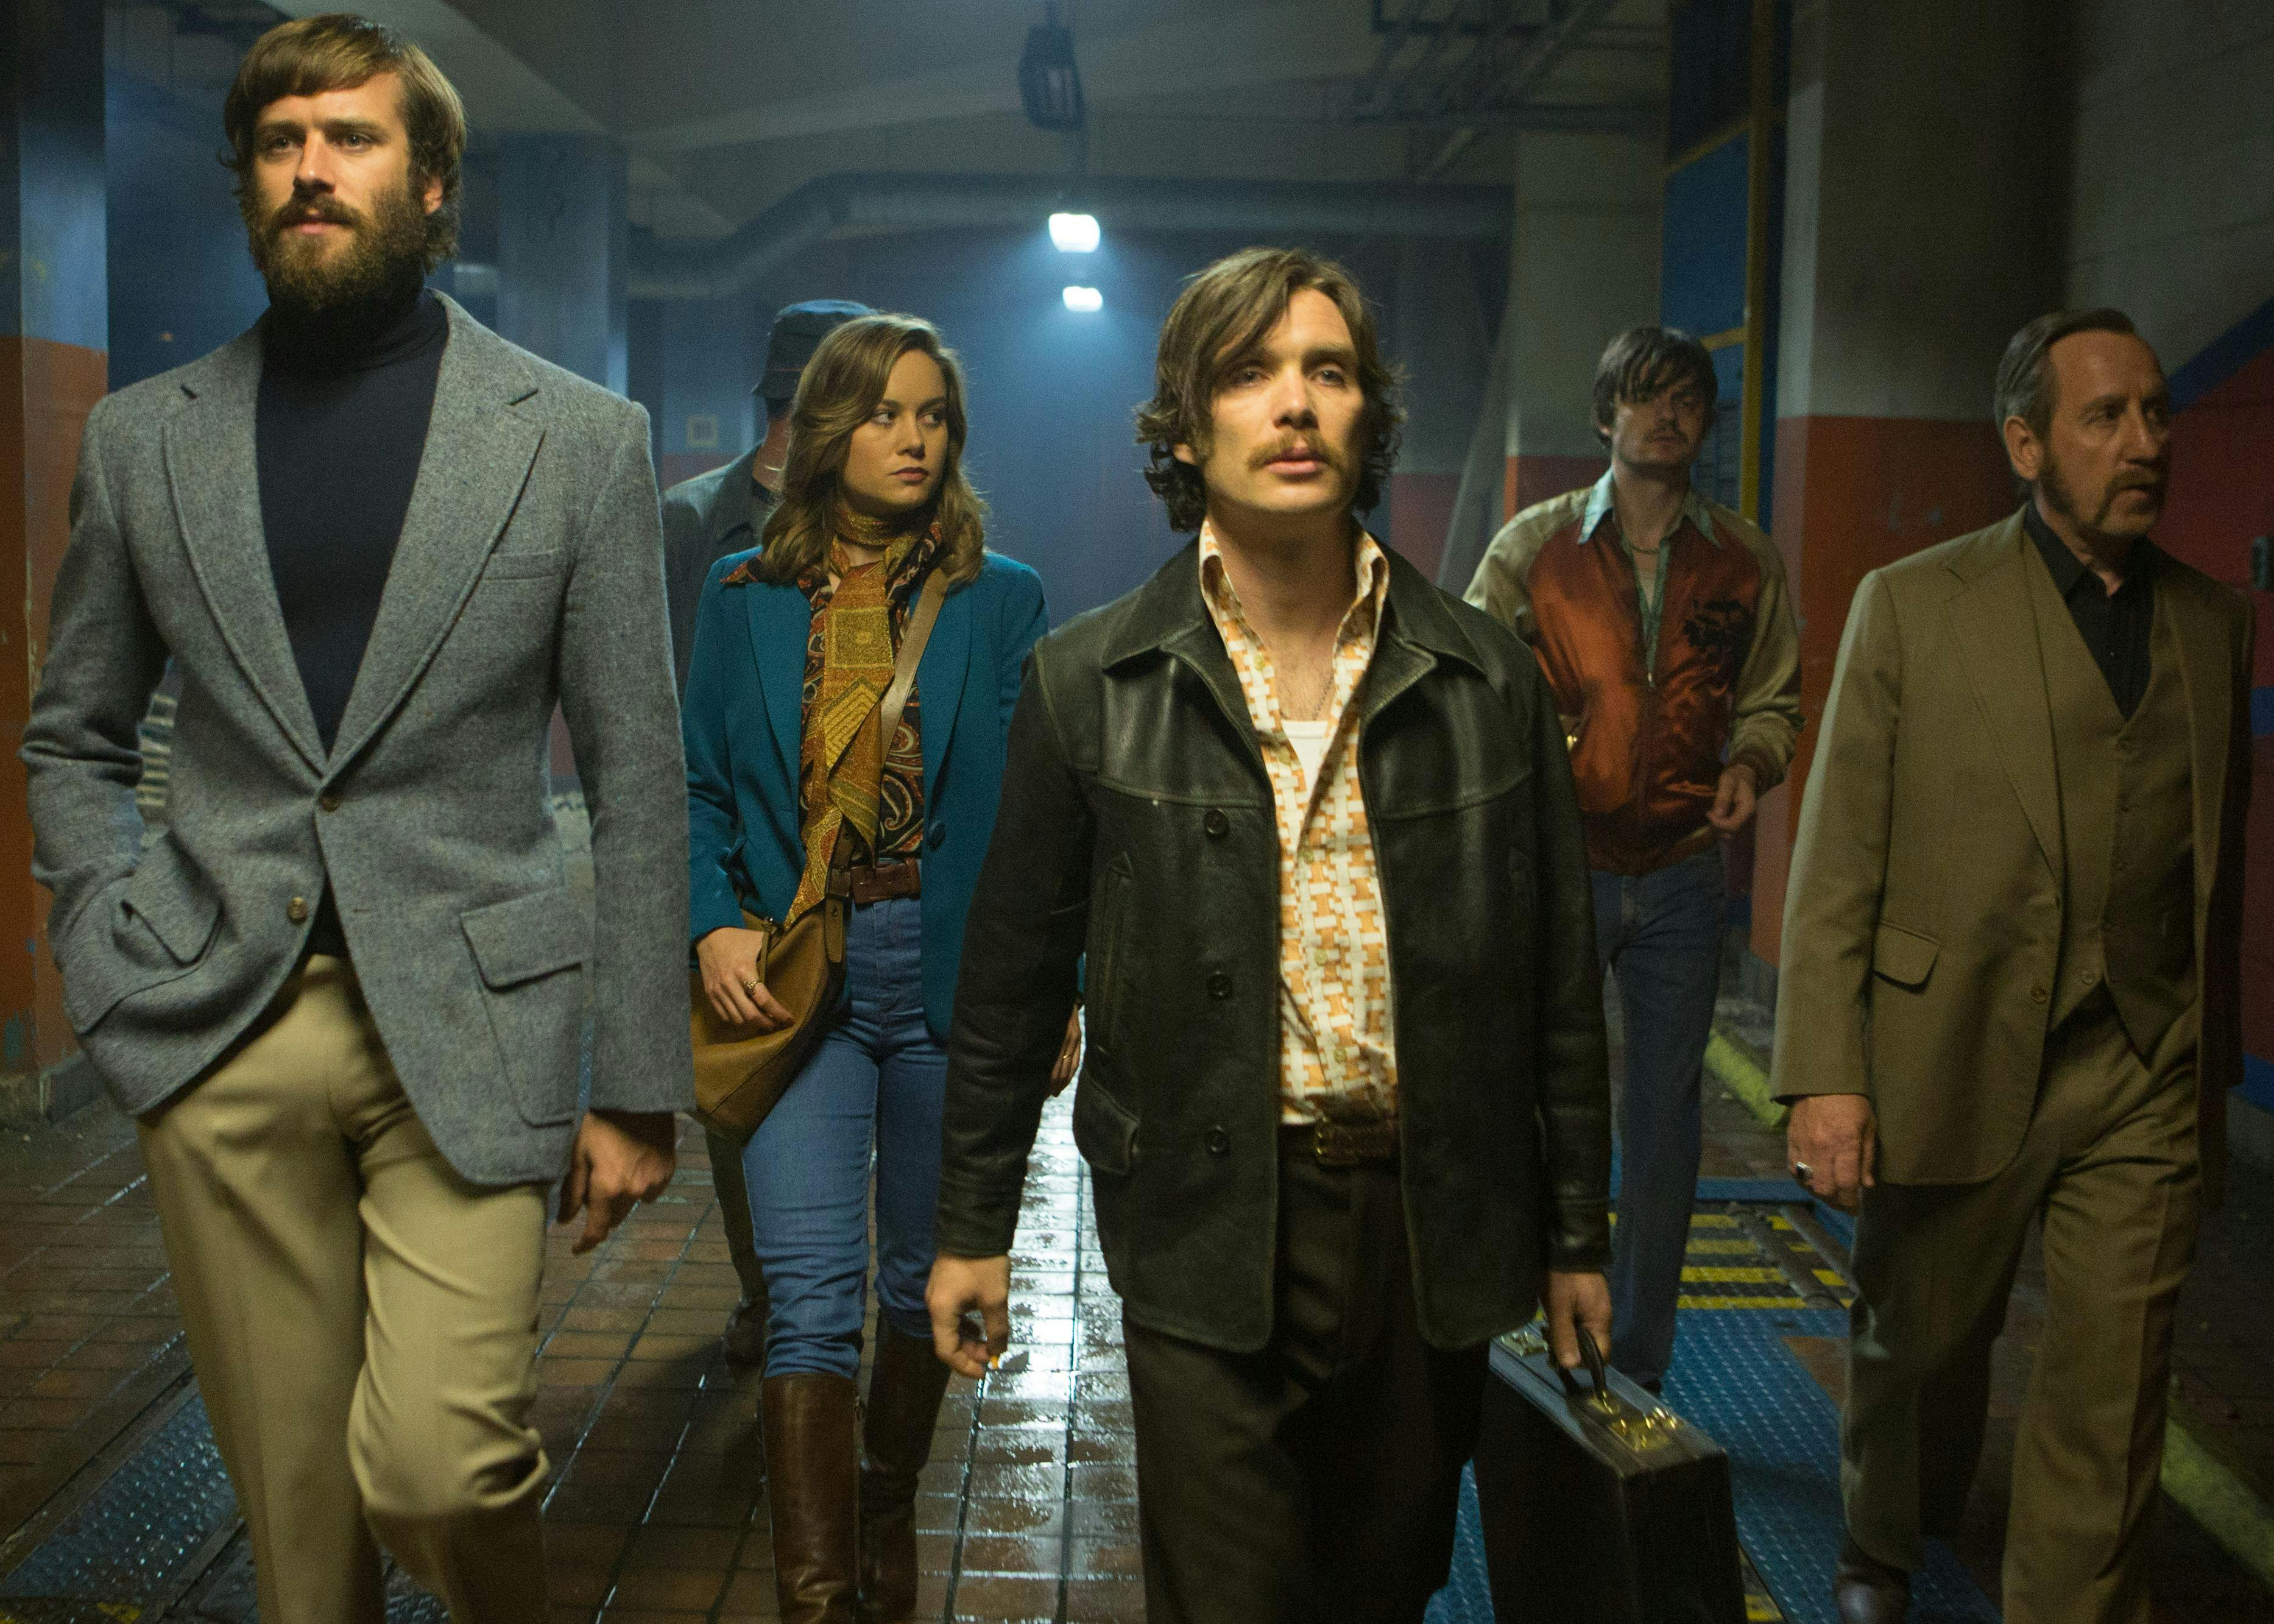 A still image featuring Armie Hammer, Brie Larson, Cillian Murphy, Sam Riley, and Micheal Smiley from the SXSW film 